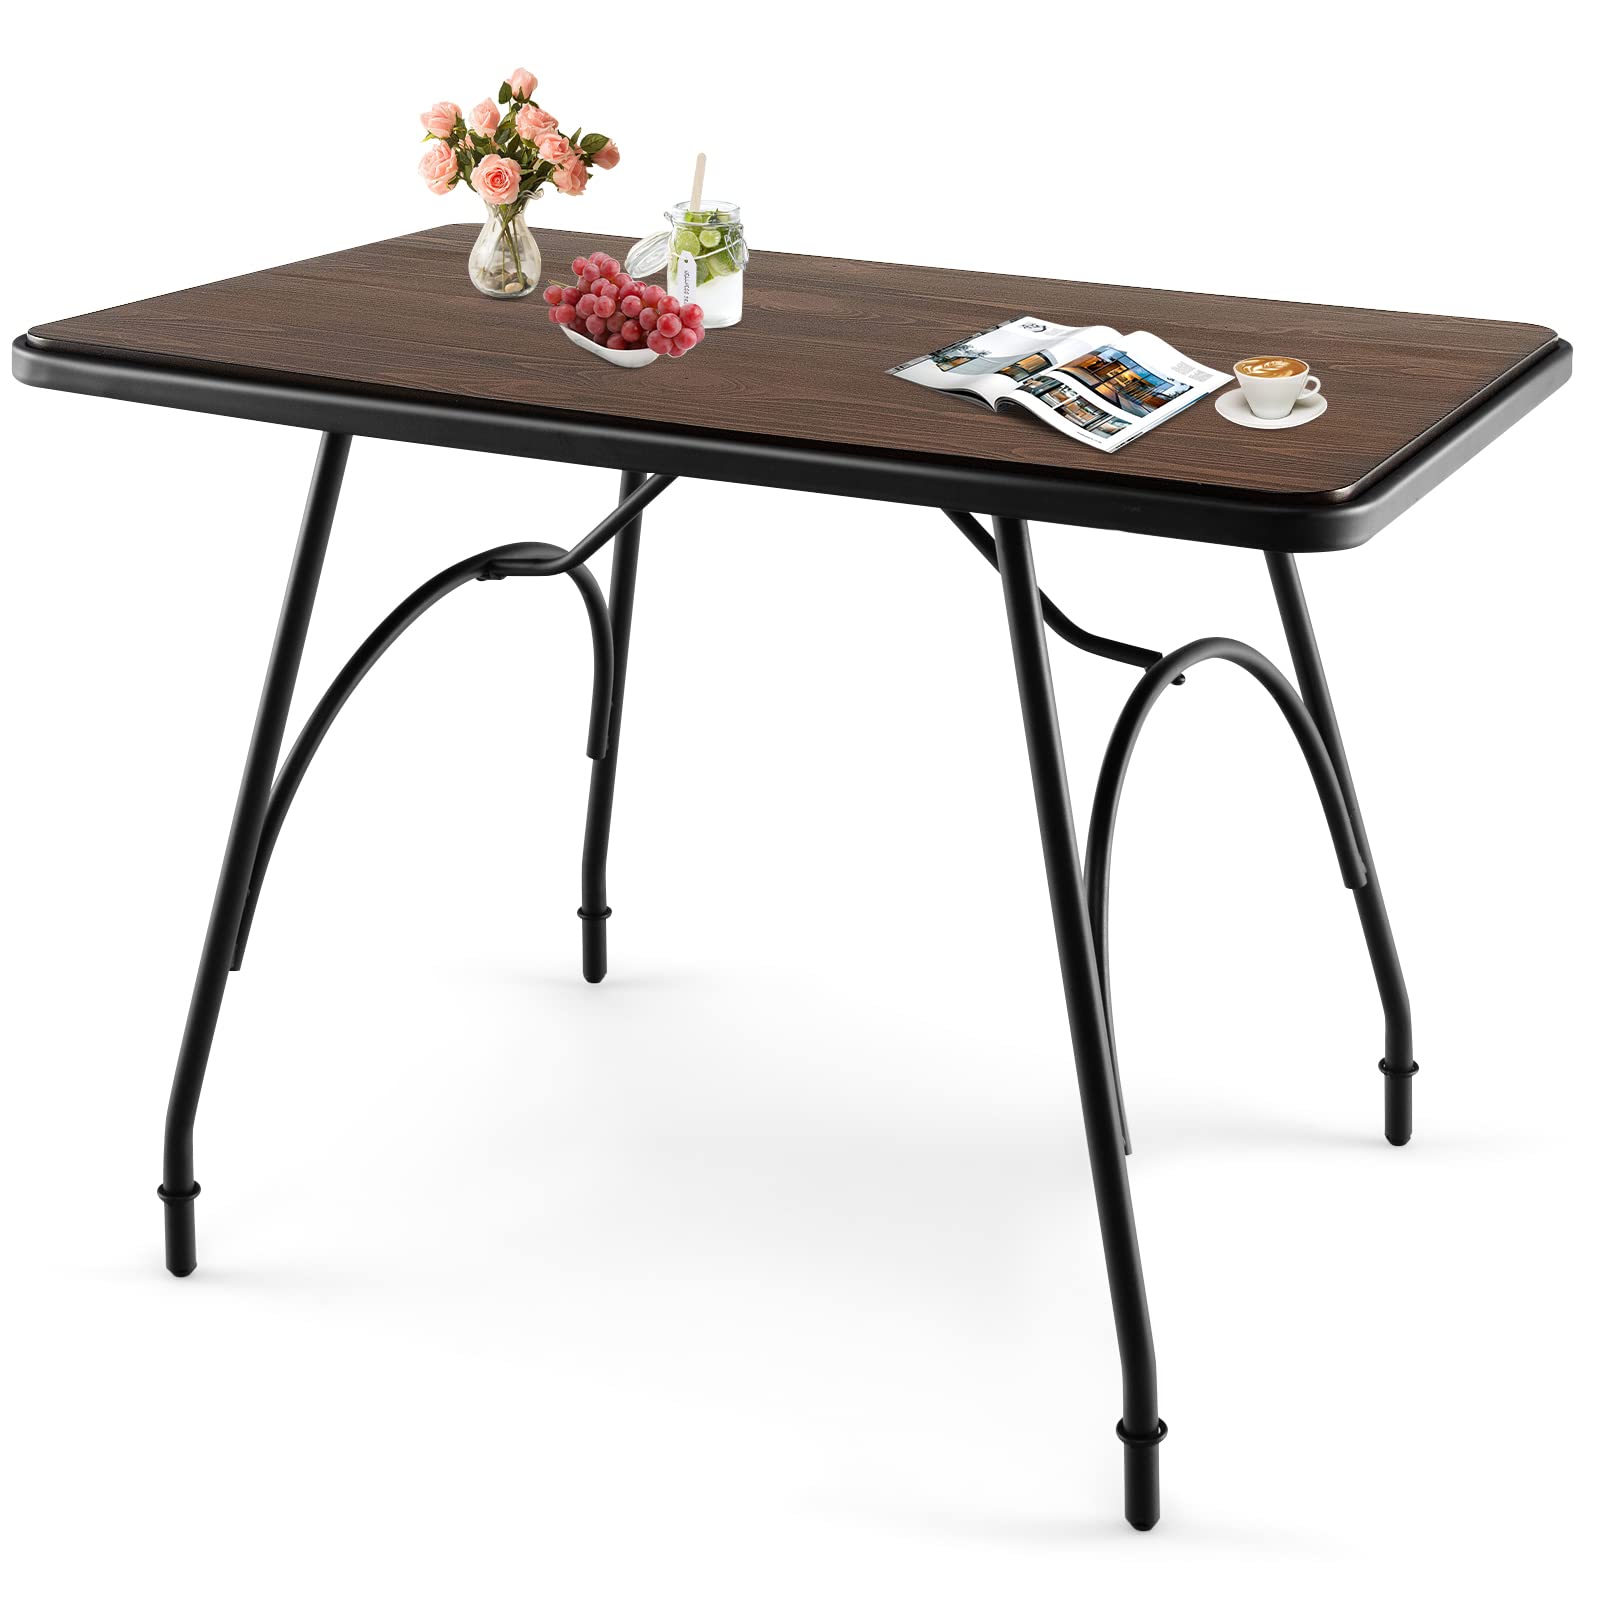 Giantex Rectangular Dining Table - Industrial Kitchen Table